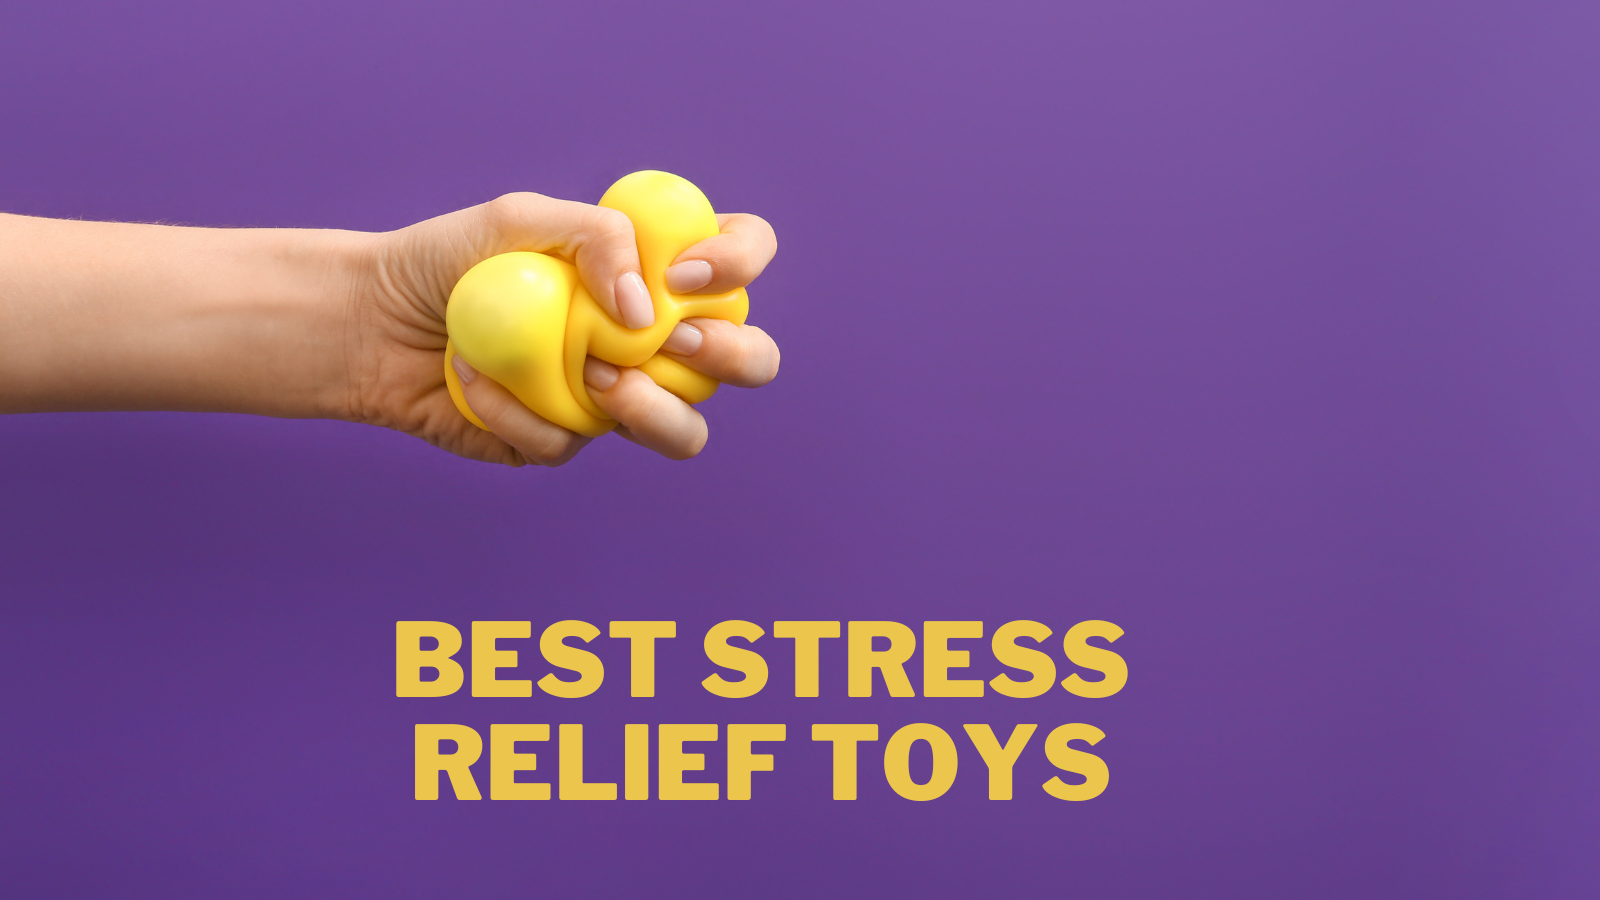 Best Stress Relief Toys